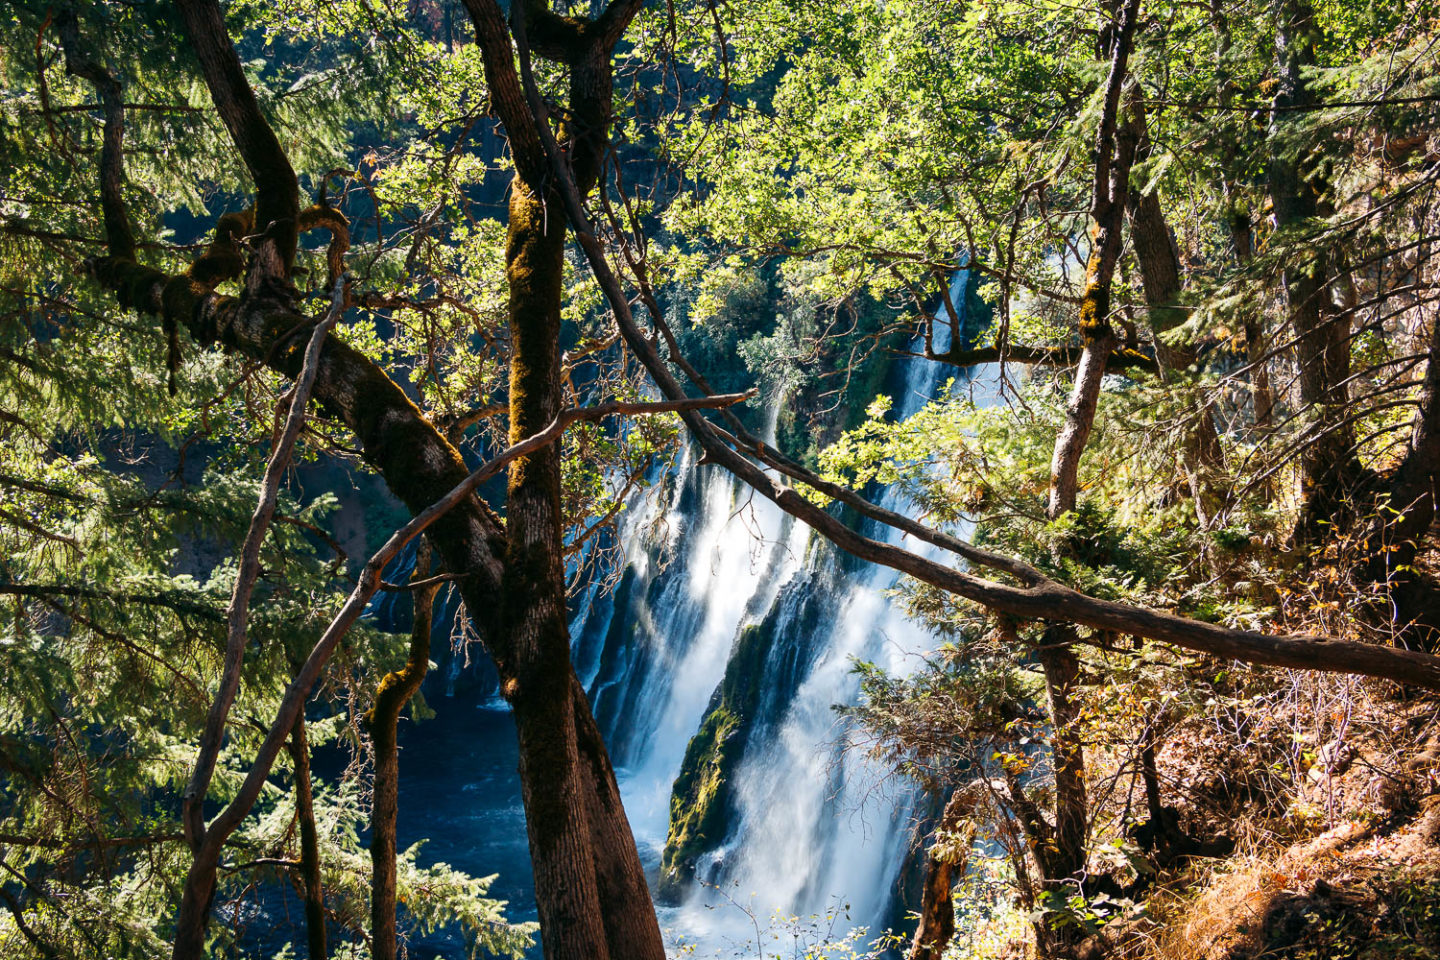 Hike to Burney Falls - Roads and Destinations